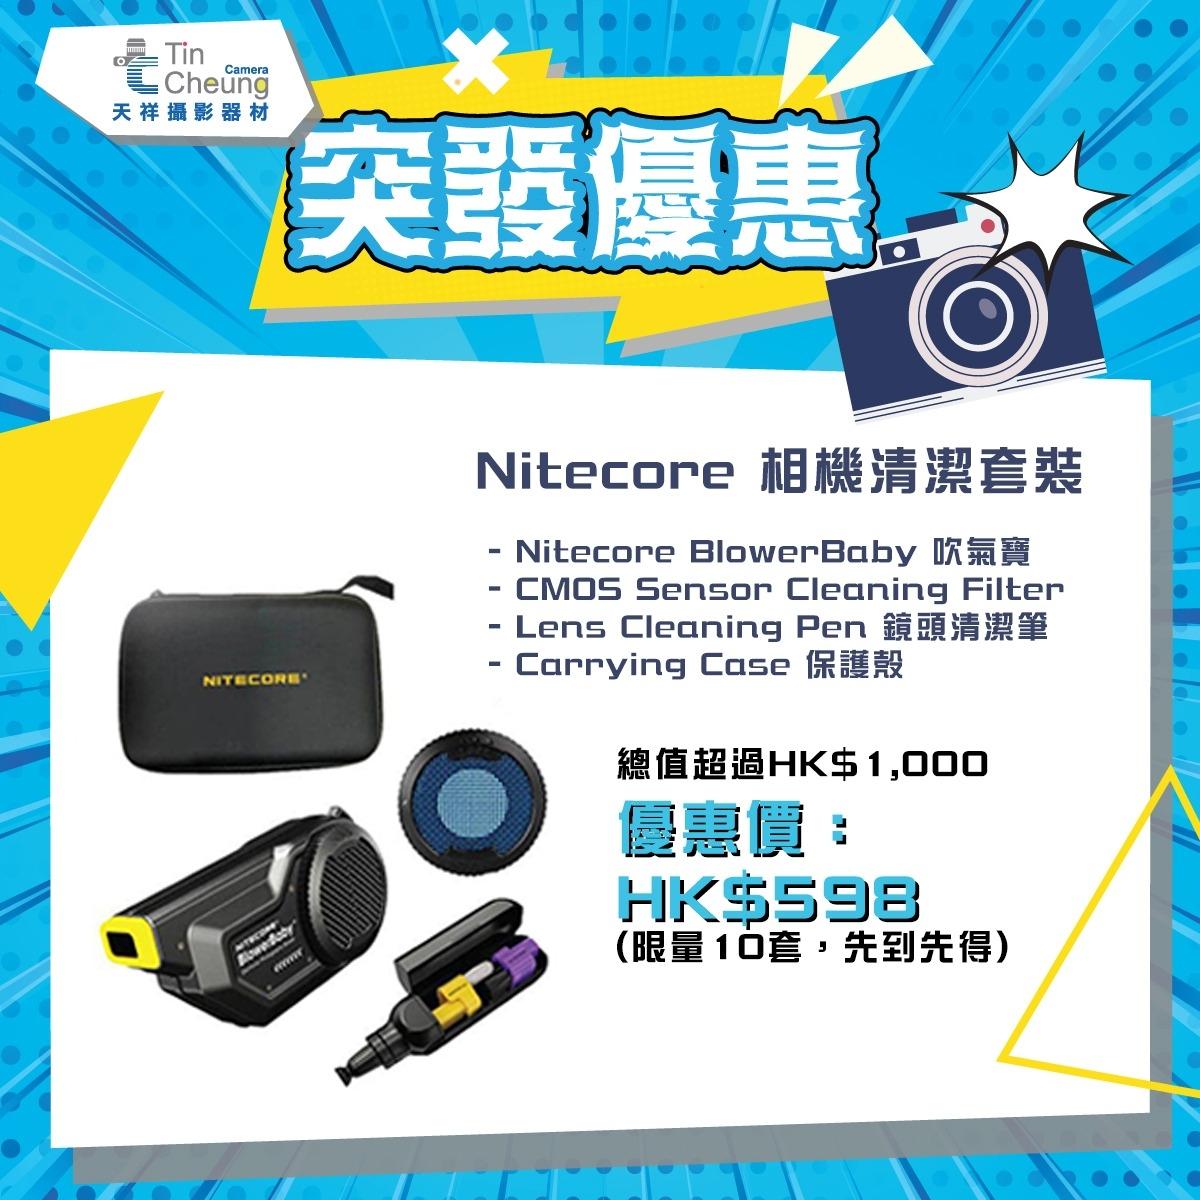 Nitecore BlowerBaby 吹氣寶套裝 (CMOS Cleaning Filter + Lens Cleaning Pen + Carrying Case)